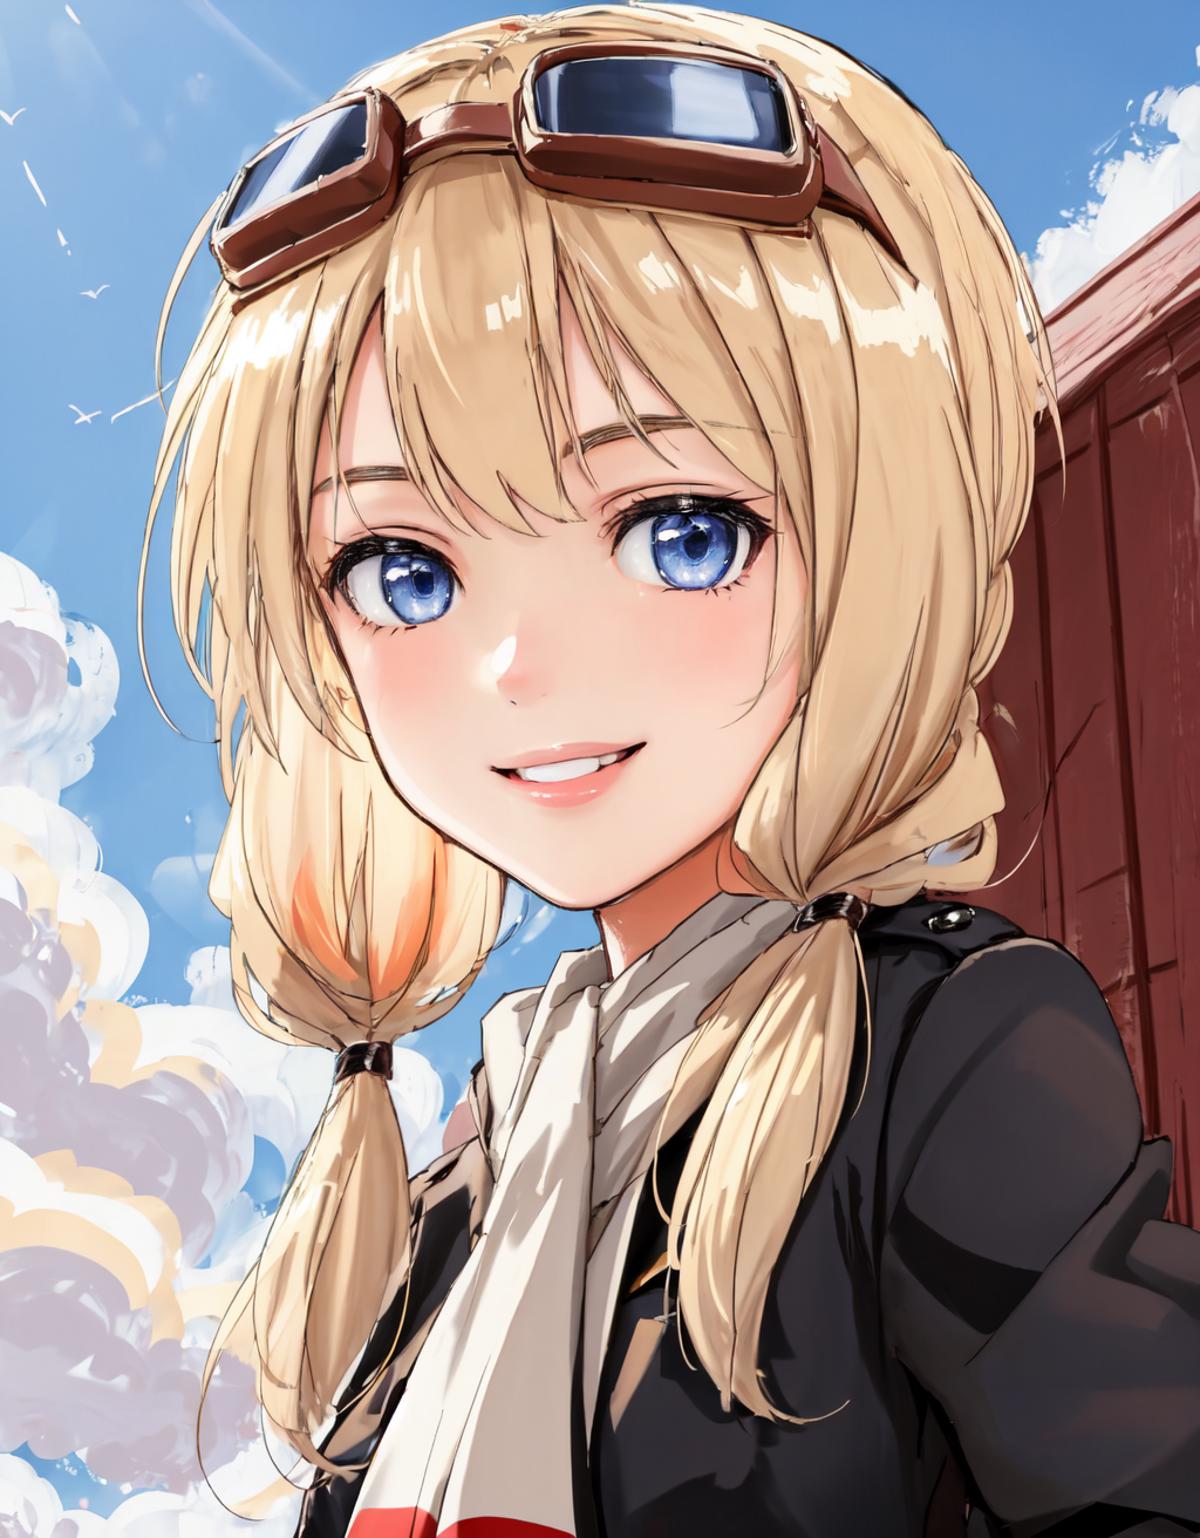 Carla J. Luksic (Strike Witches) image by Litty877